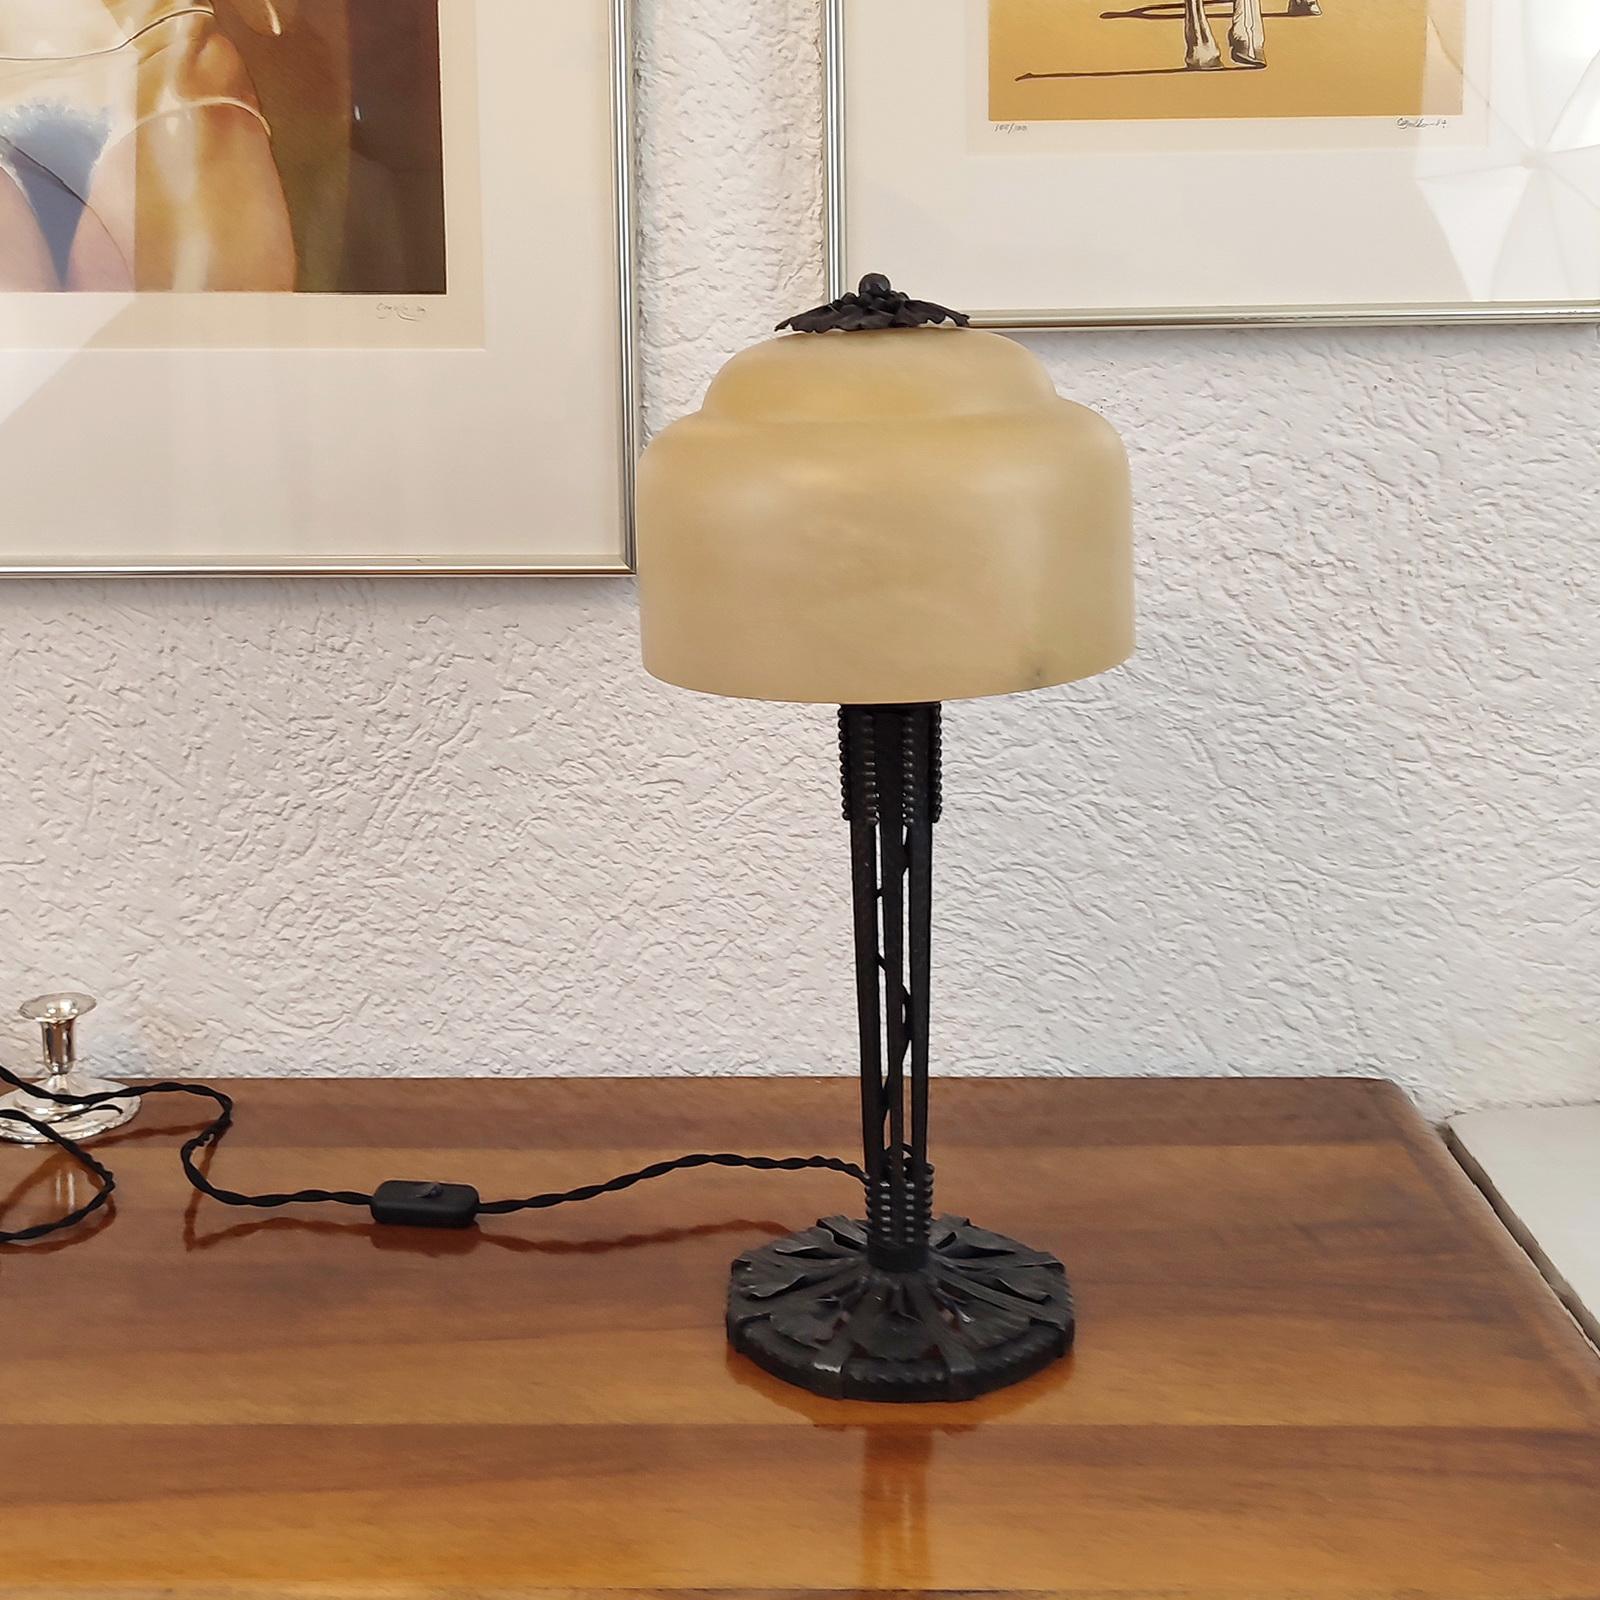 Table lamp by Edgar Brandt, made of wrought iron, with alabaster shade.
Ginkgo leaves motif. Stamped signature to the foot.
Dimensions:
Height 54 cm, diameter 23 cm
Cleaned and newly rewired.